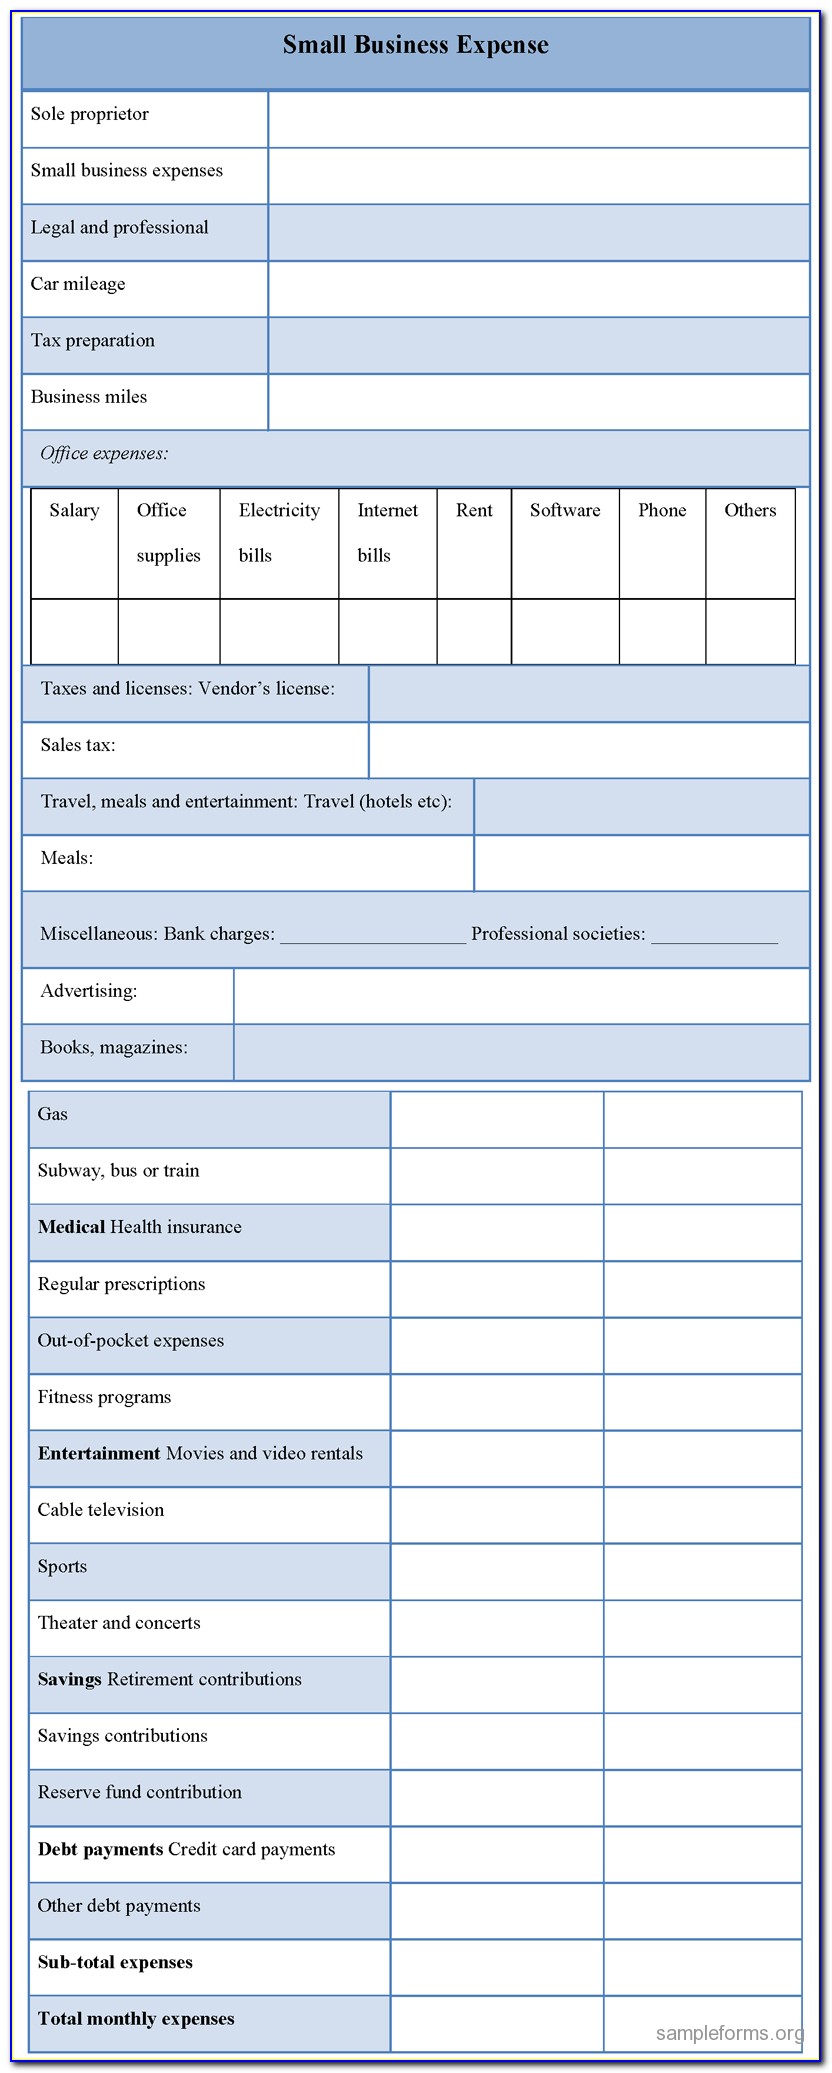 Business Expense Forms Free